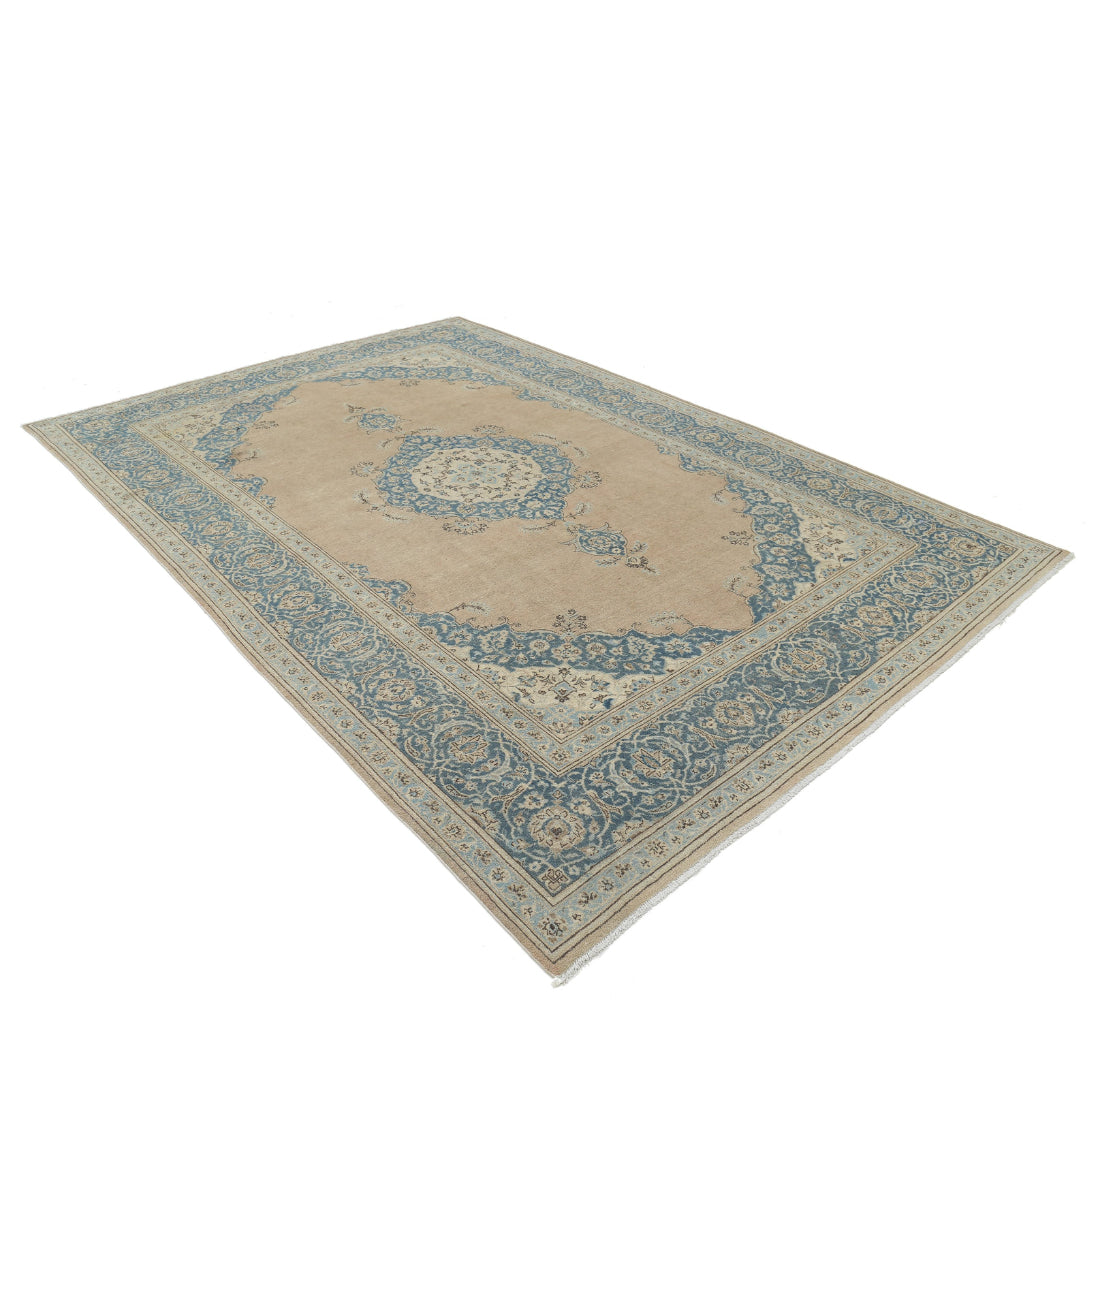 Hand Knotted Vintage Persian Tabriz Wool Rug - 7'4'' x 11'1'' 7'4'' x 11'1'' (220 X 333) / Taupe / Blue